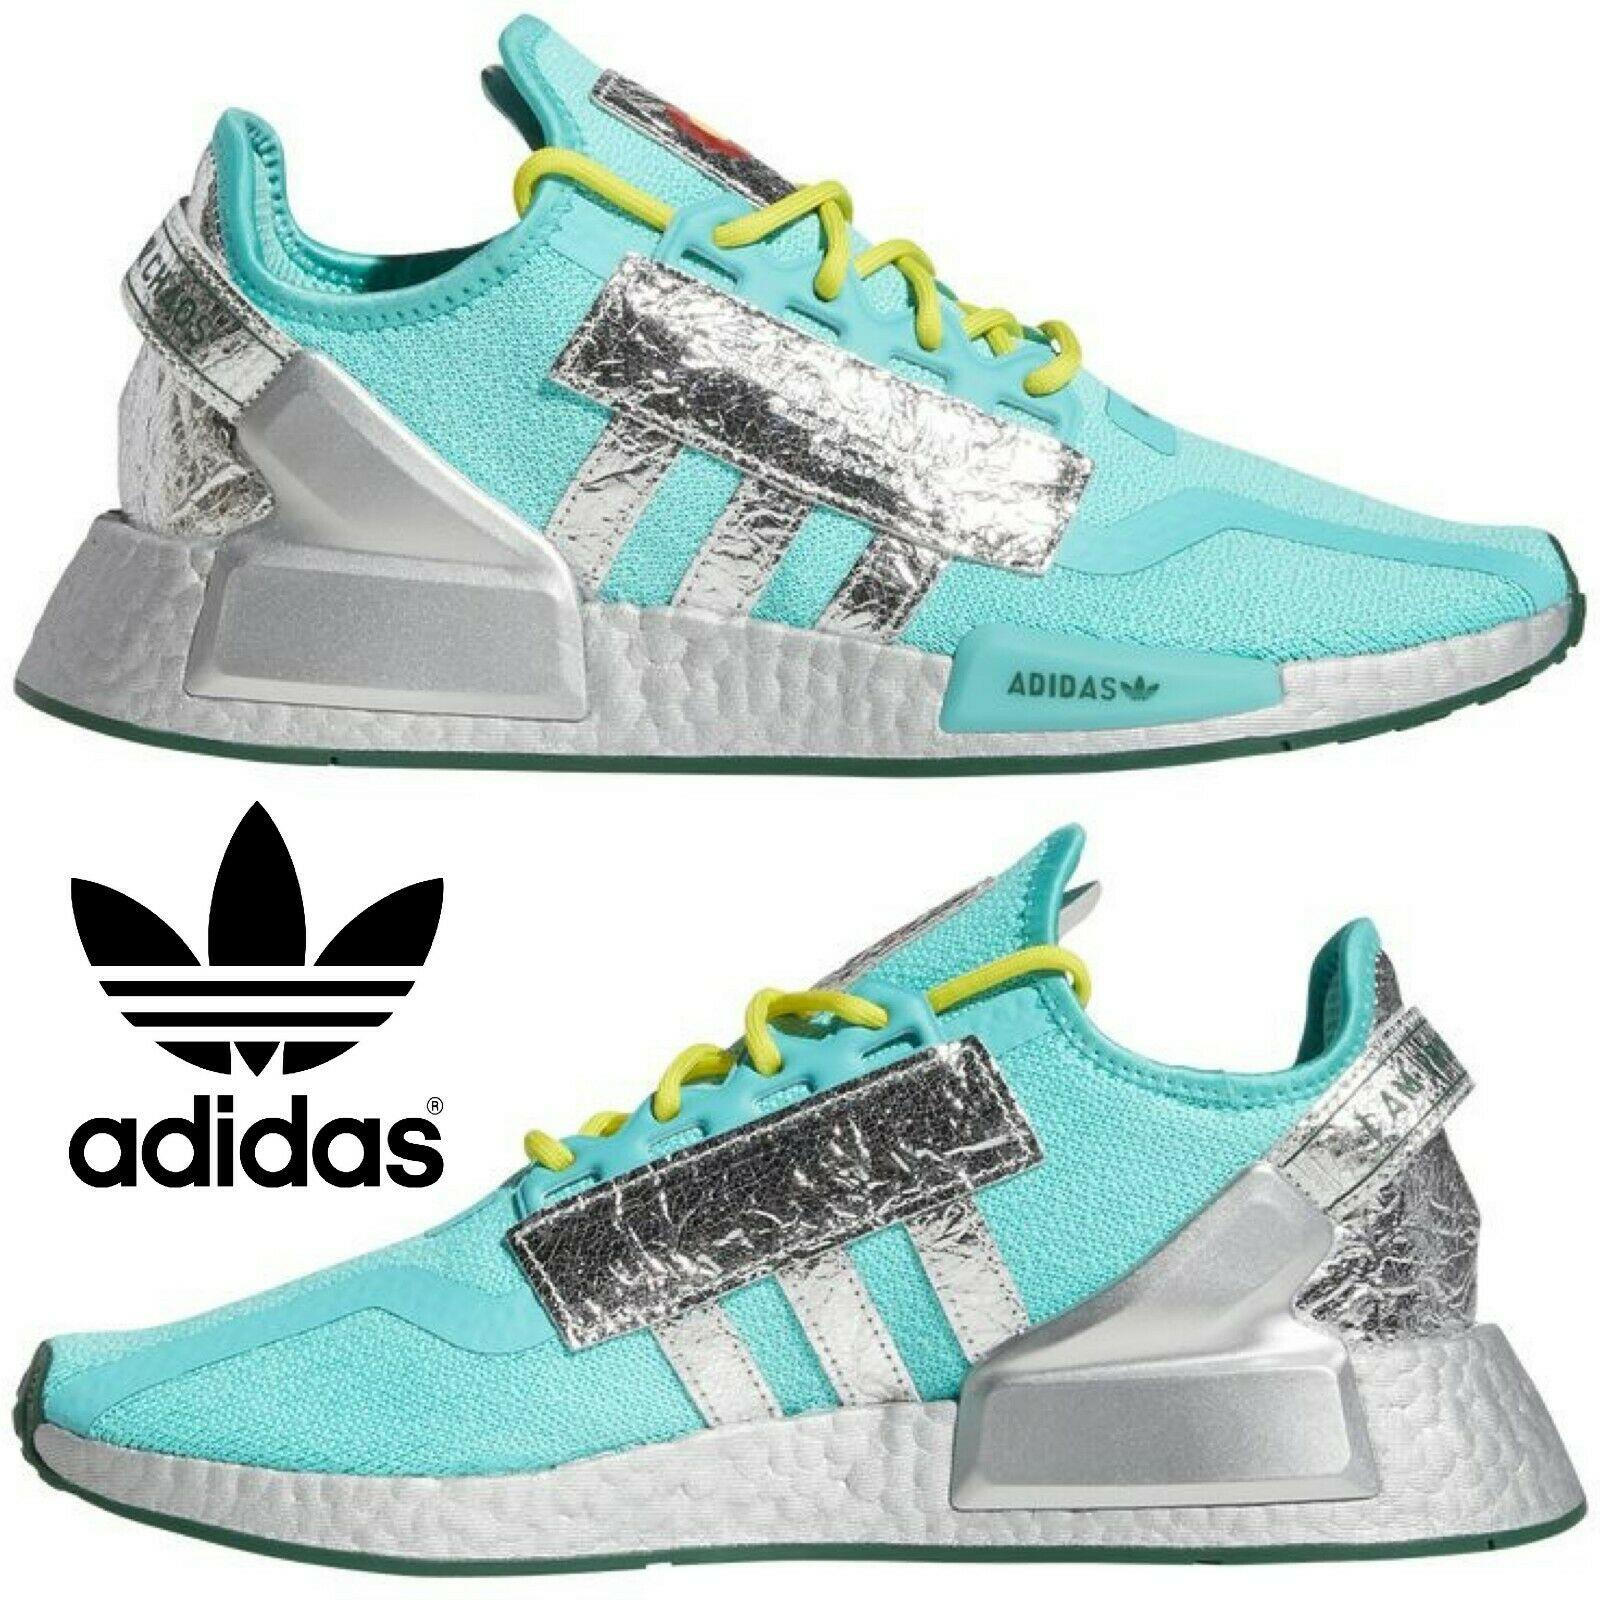 Adidas Originals Nmd V2 Men`s Sneakers Running Shoes Gym Casual Sport Teal Blue